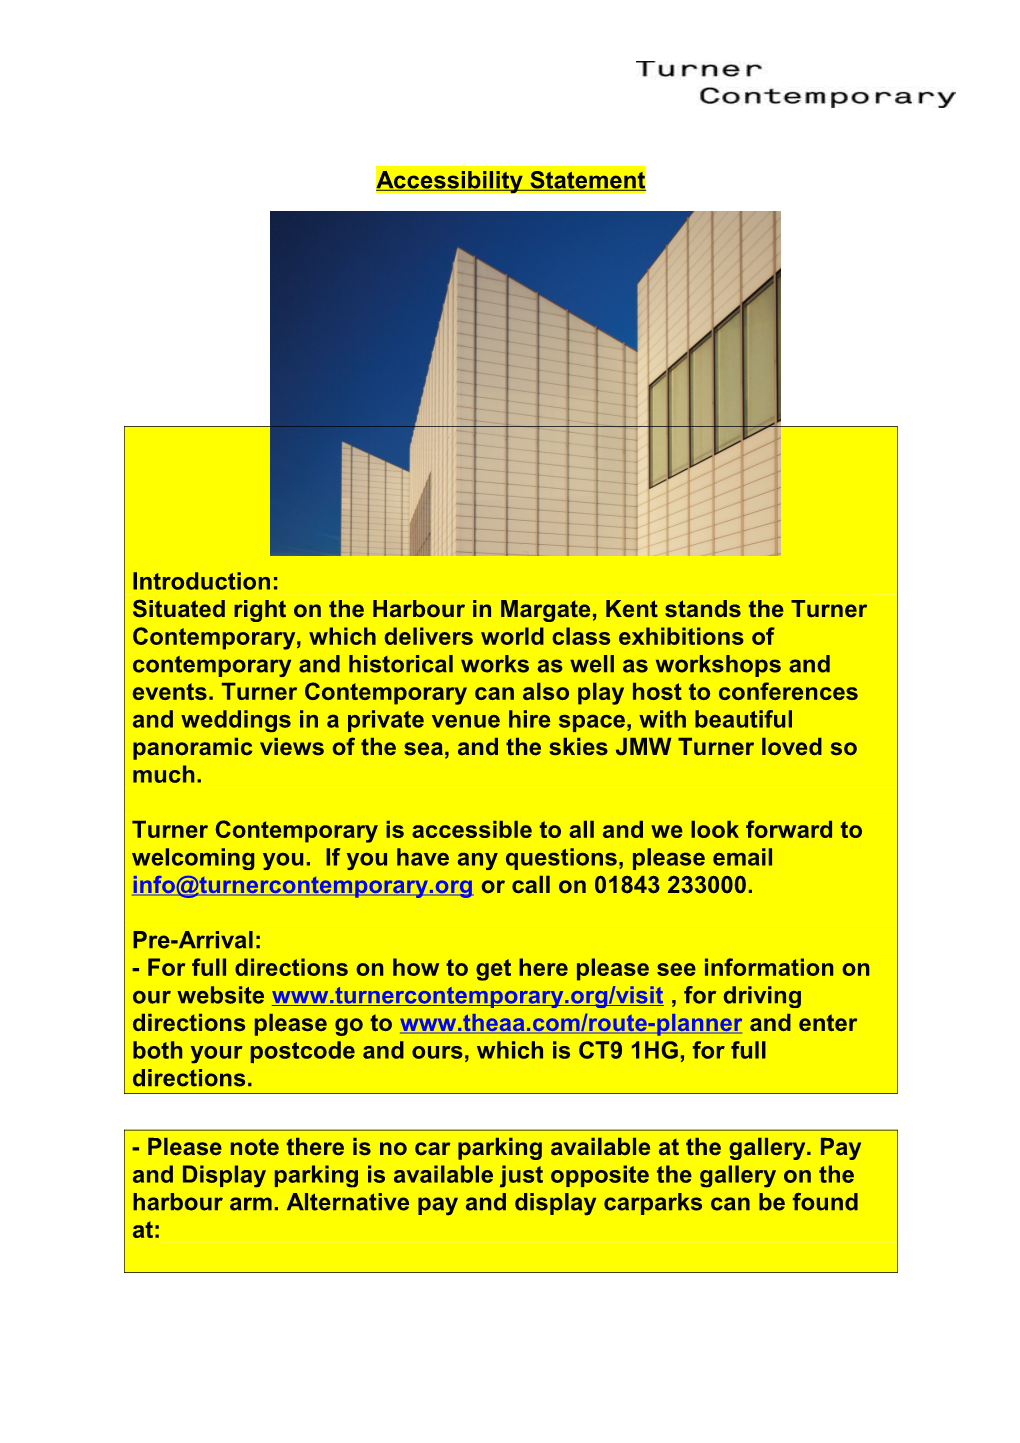 Turner Contemporary Is Accessible to All and We Look Forward to Welcoming You. If You